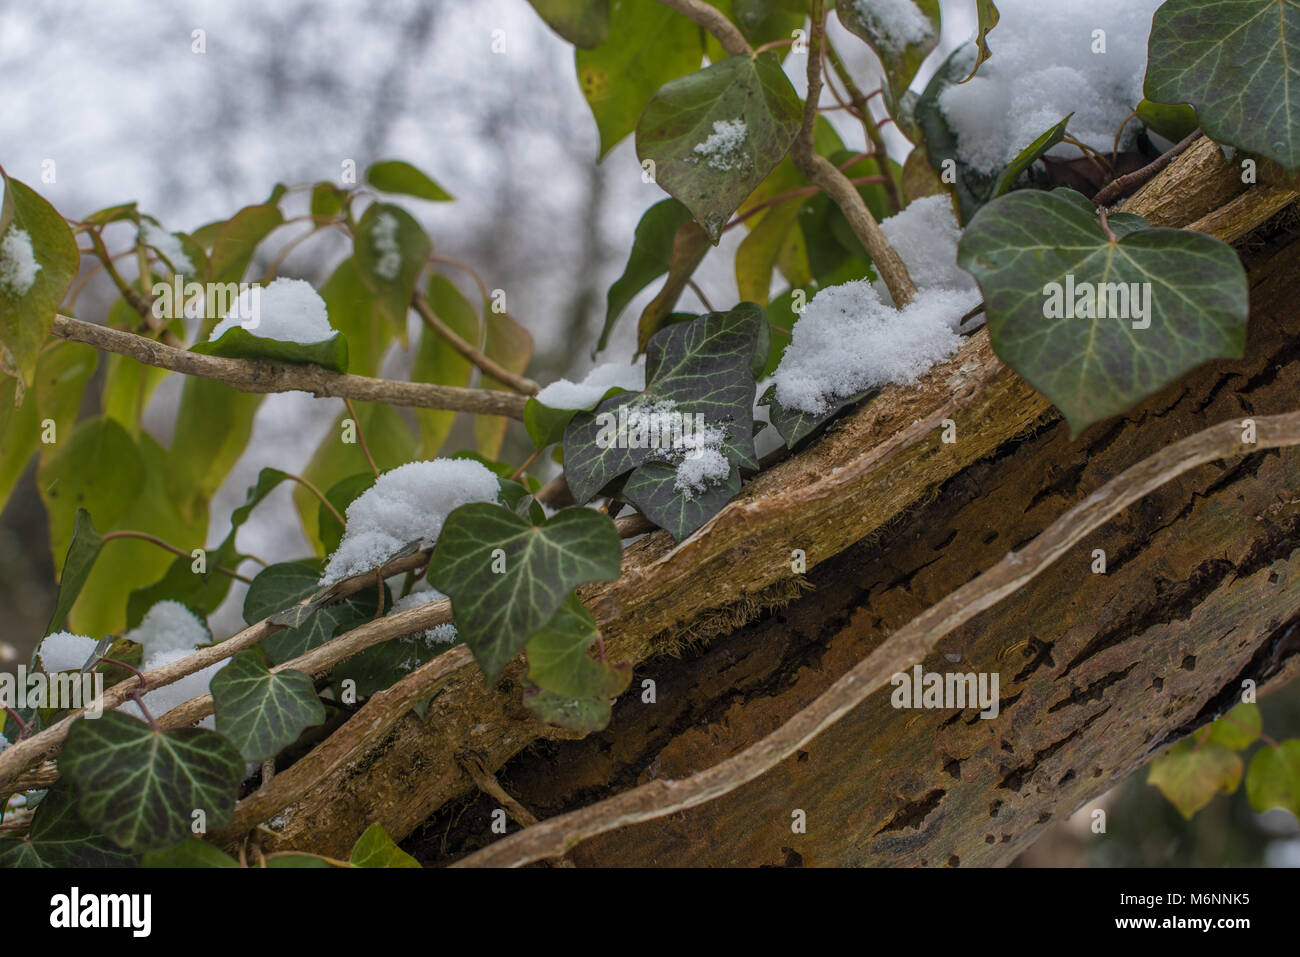 Snowy scenes on a cold winters day Stock Photo